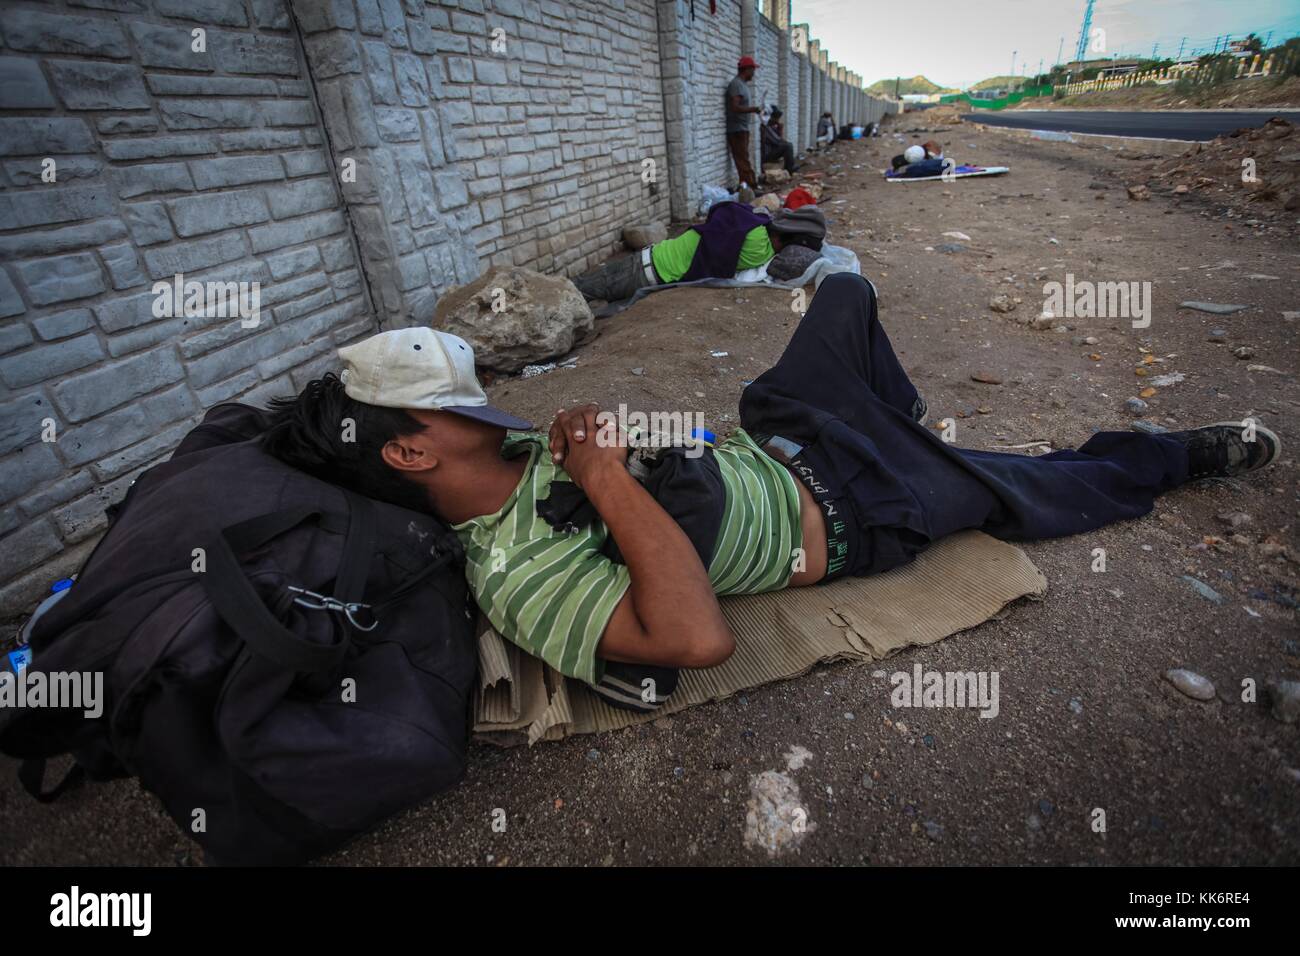 Sonora floating population lives in poverty, come from all parts of the Mexican republic, are unemployed and roof to sleep, roam the northwestern region of Mexico in search of employment in agricultural fields on the train traveling illegally Stock Photo